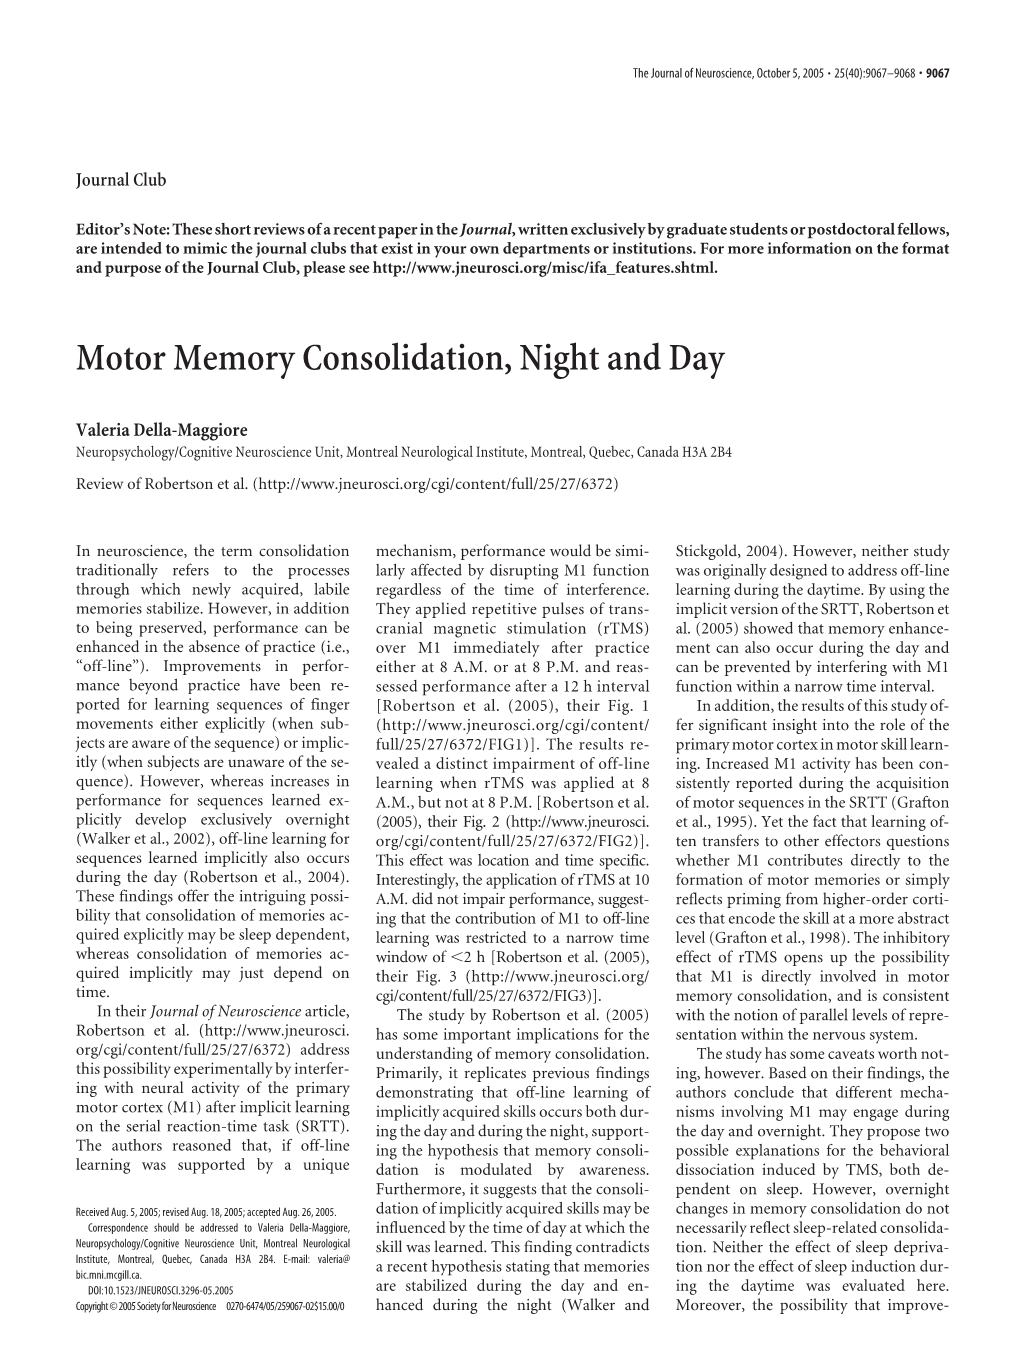 Motor Memory Consolidation, Night and Day